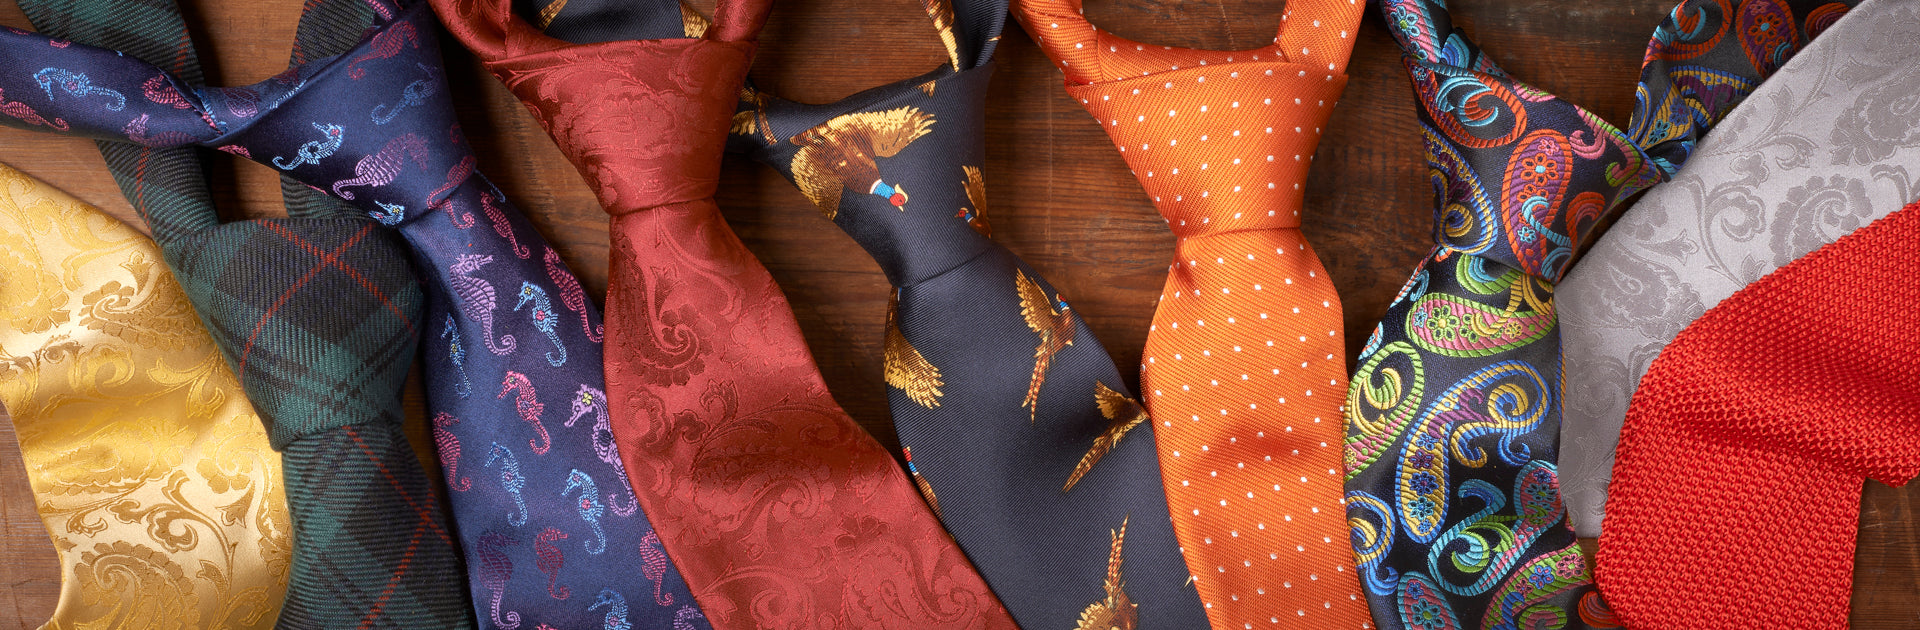 The Tie Store - Ties for Every Occasion